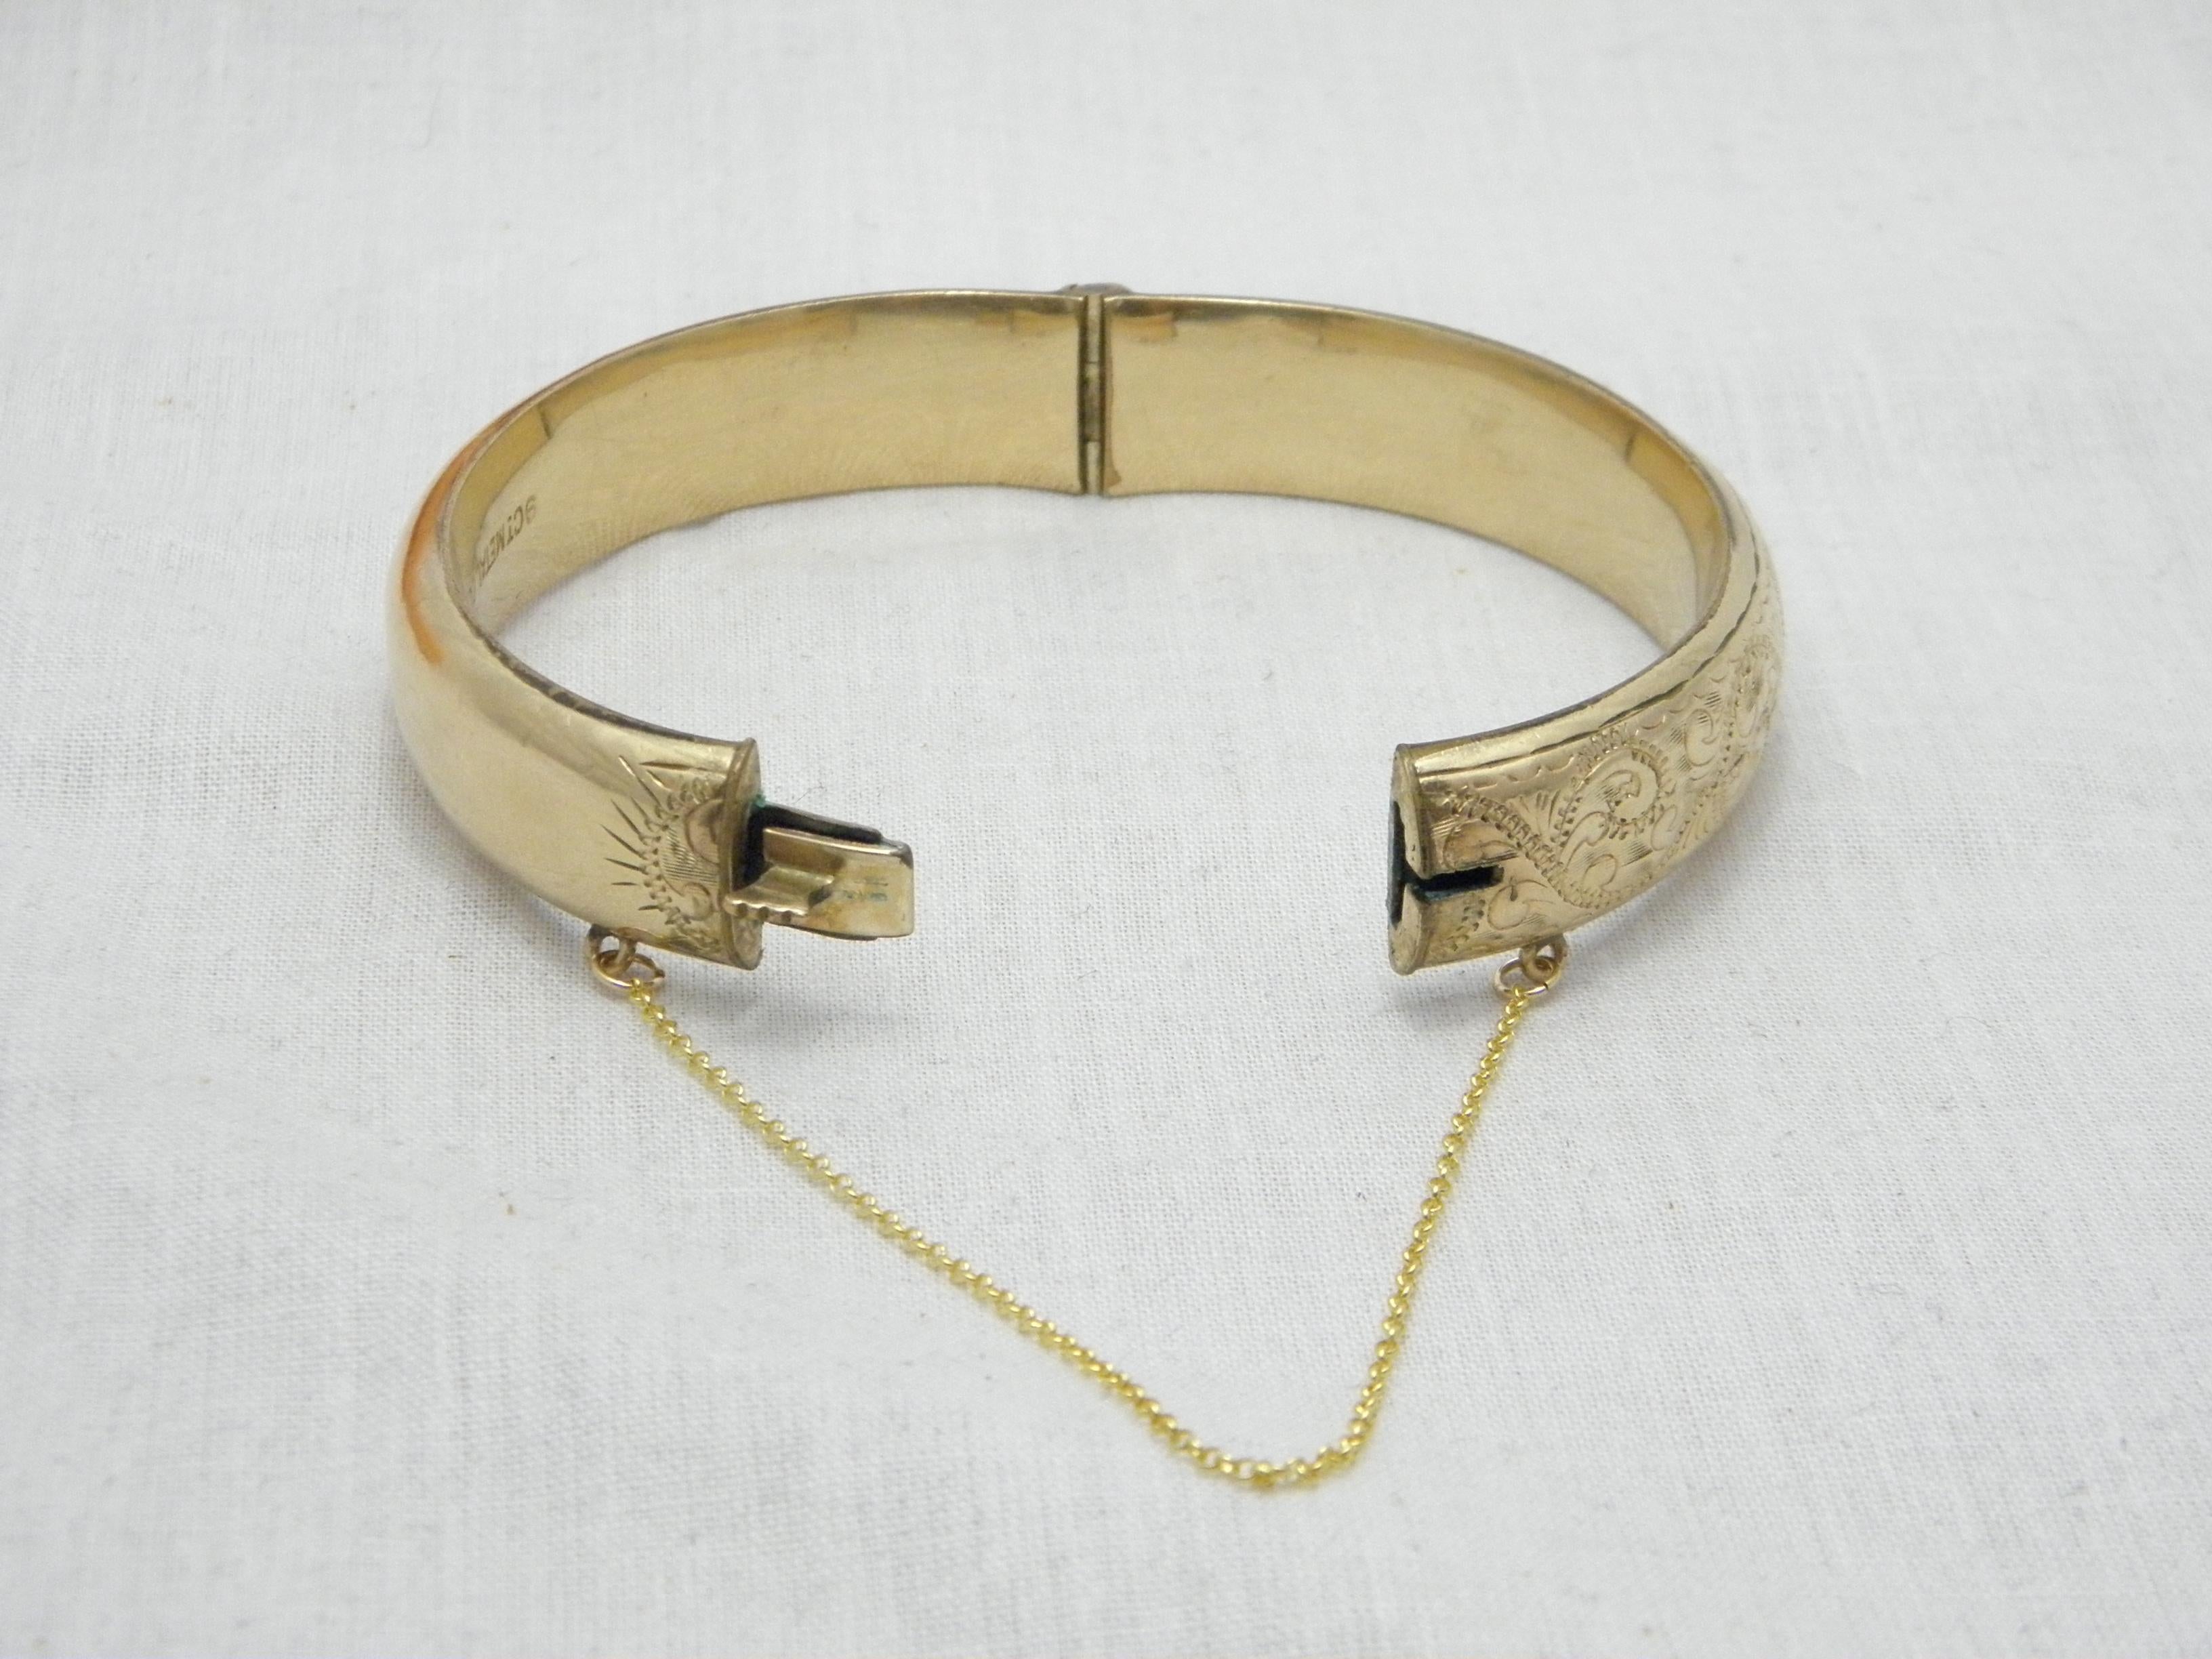 Bargain 9ct Gold 'Metal Cored' Floral Engraved Cuff Hinged Bracelet Bangle 375 In Fair Condition For Sale In Camelford, GB